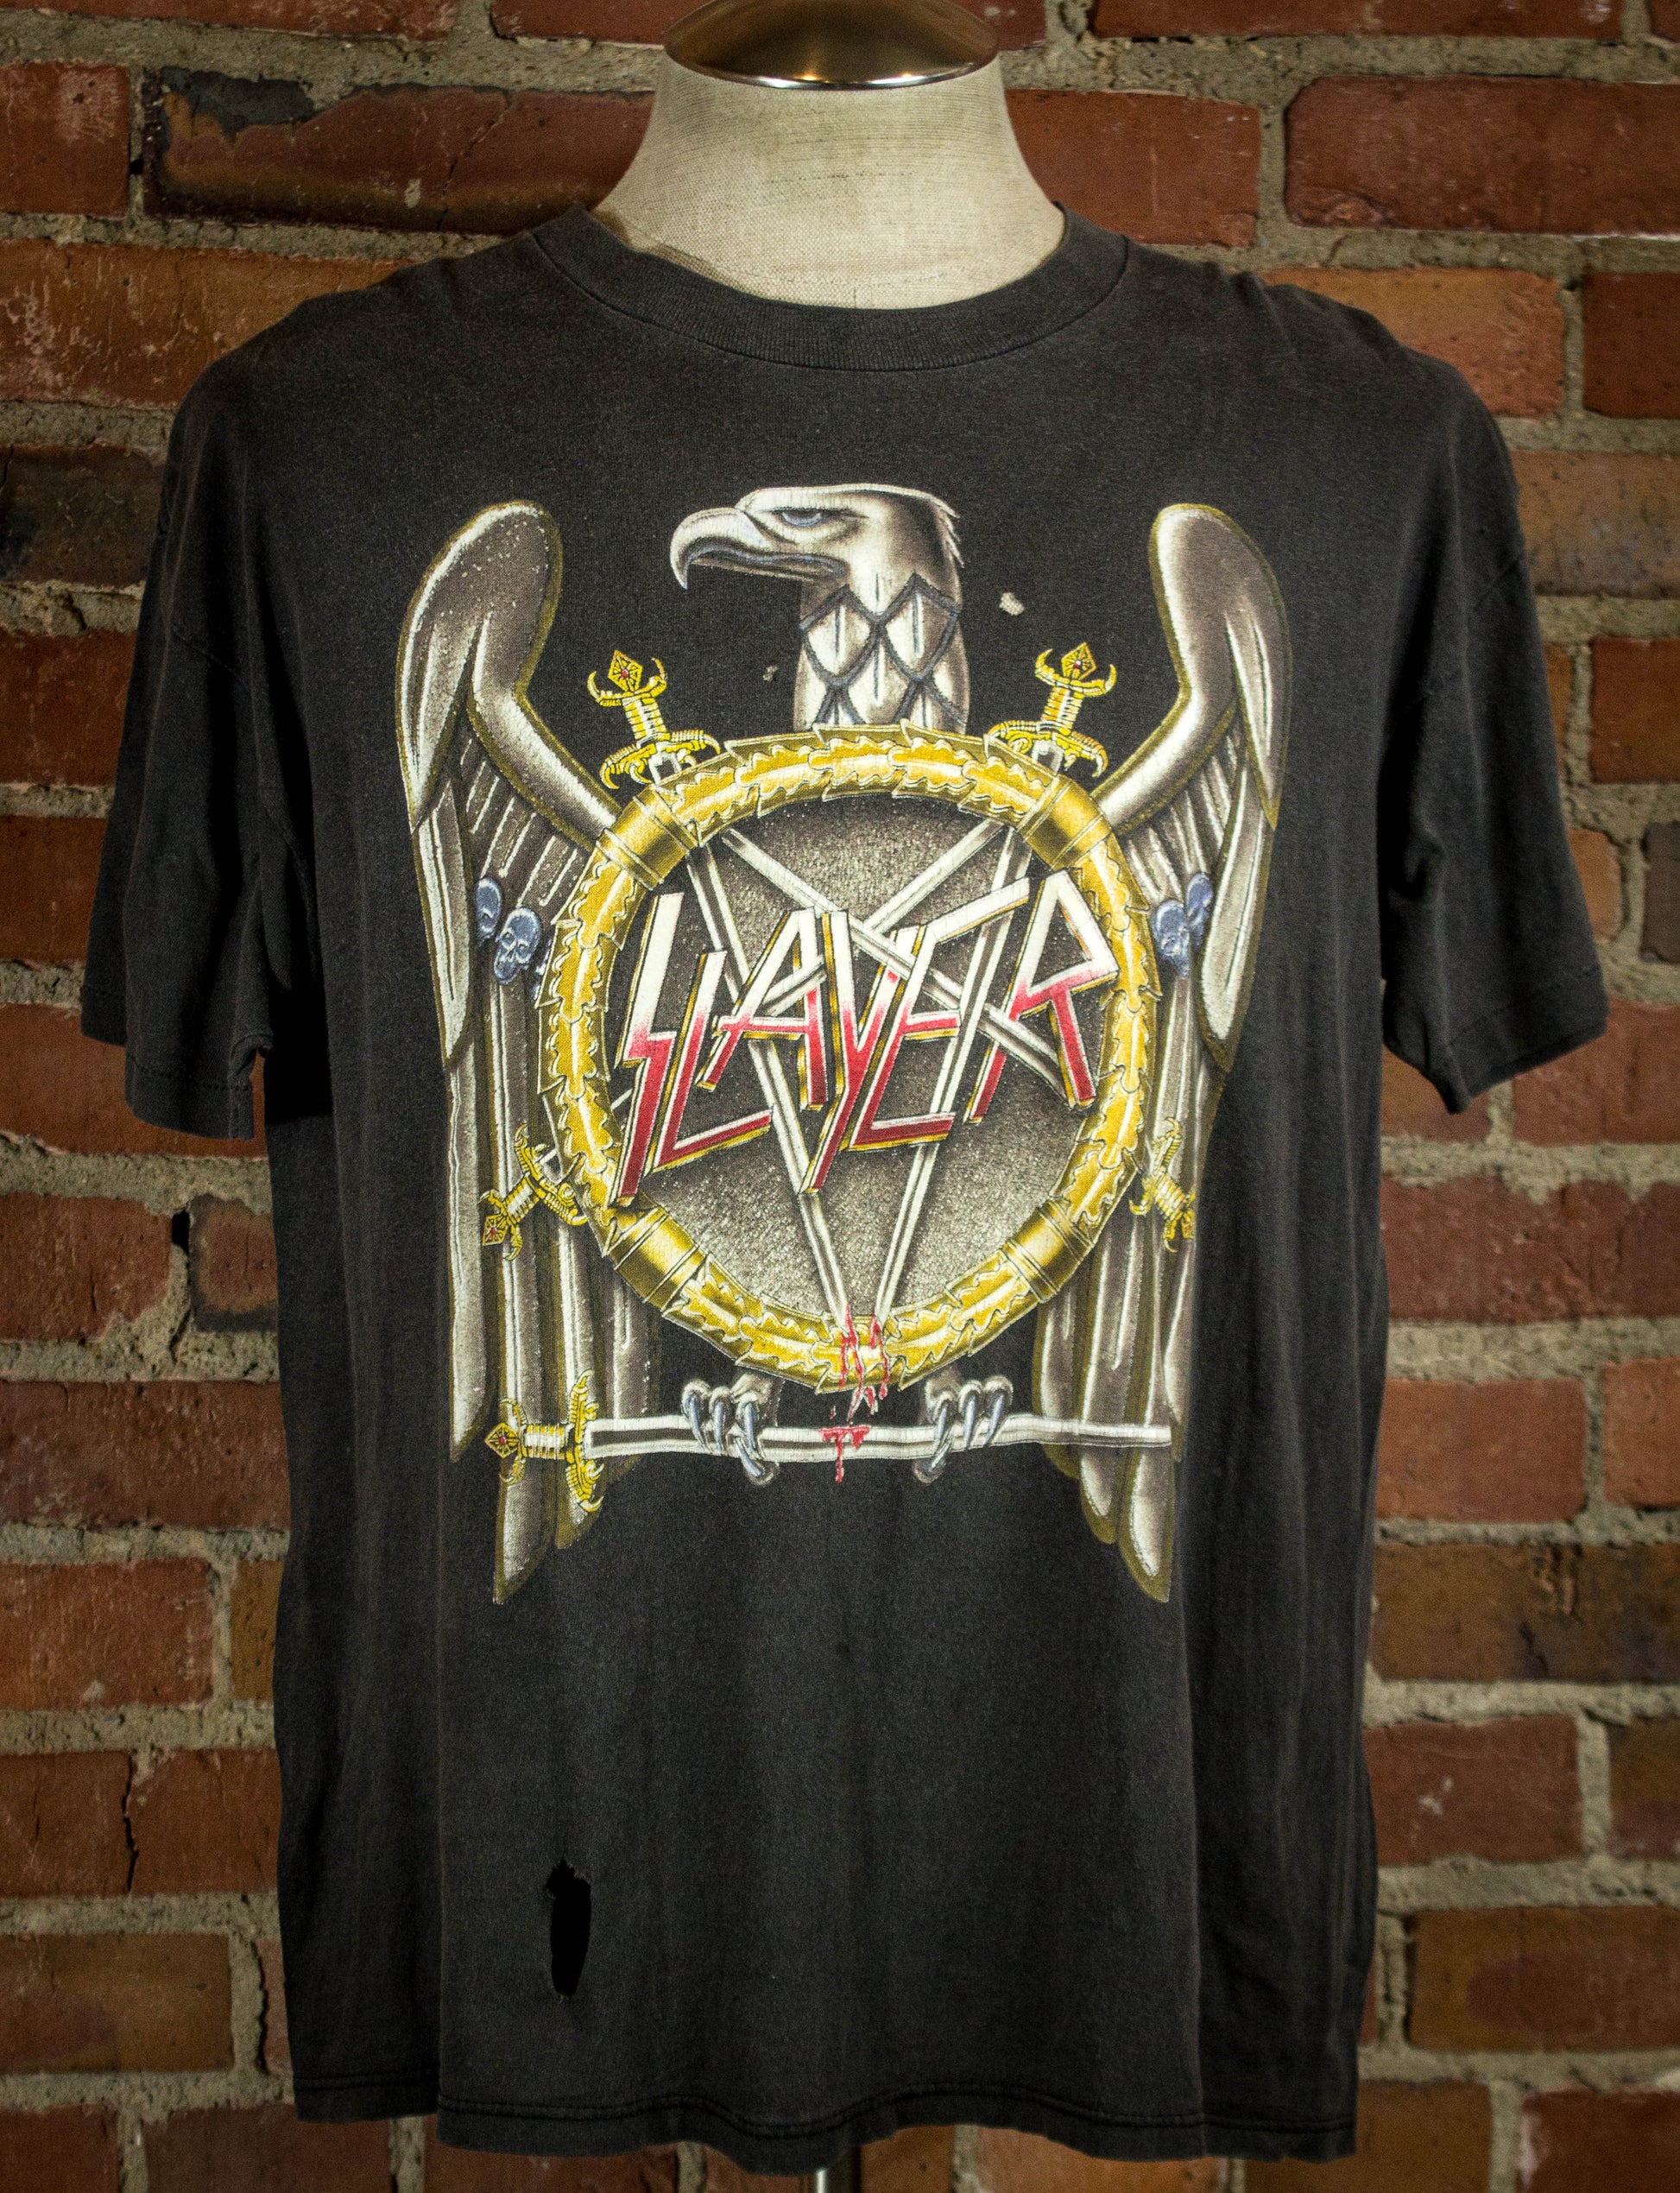 Vintage 1991 Slayer Touring In The Abyss Eagle Concert T Shirt XL